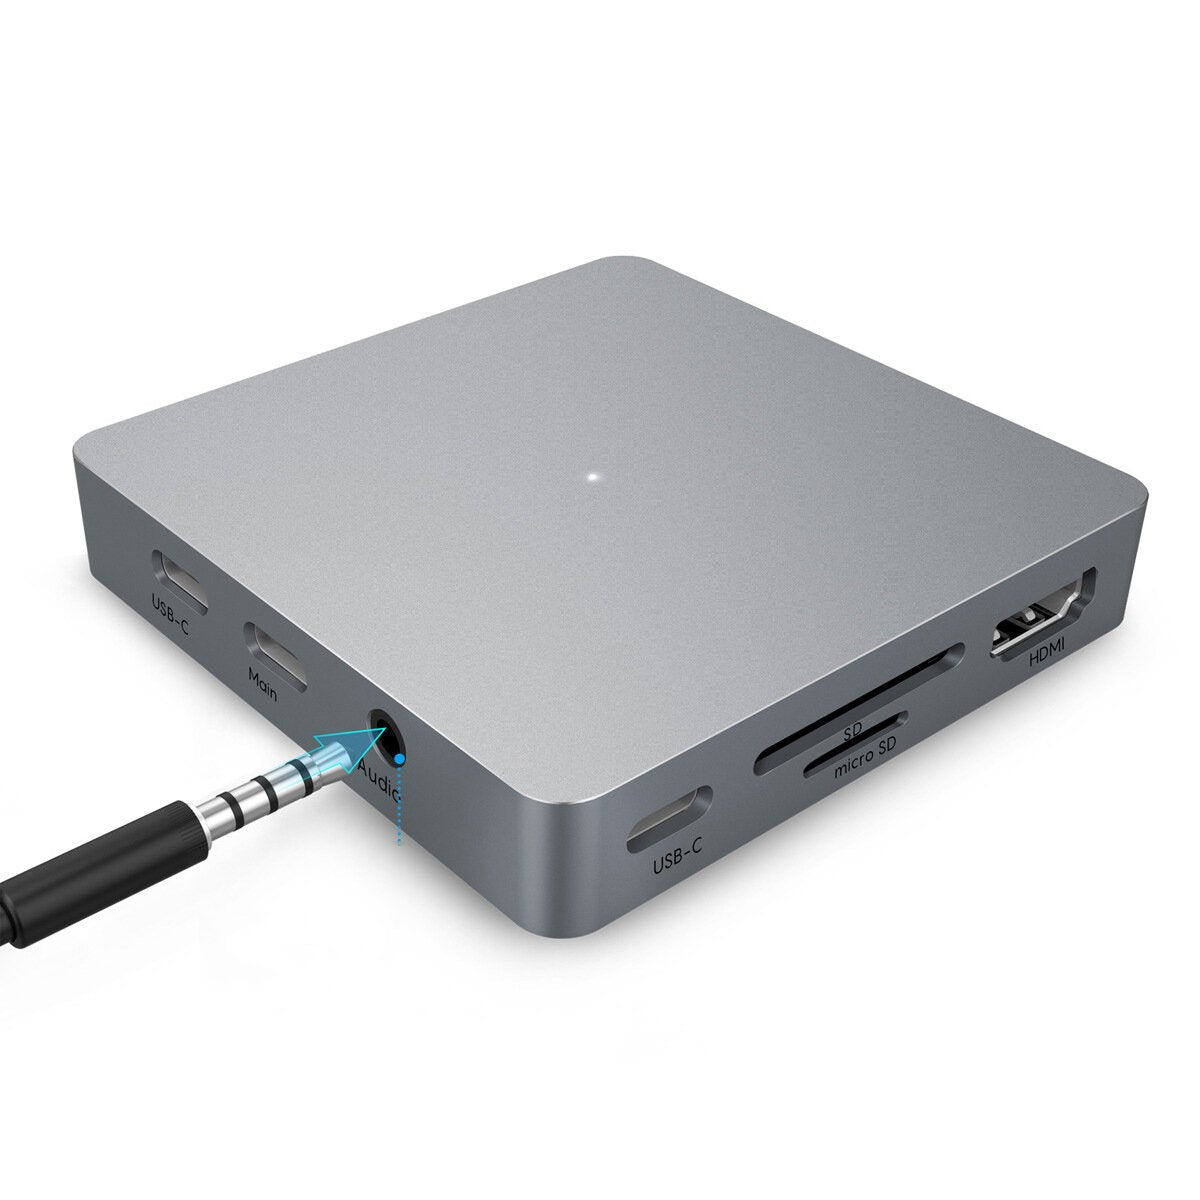 Eleven-in-one Type-C to Network Card Adapter Notebook Multi-function HD USB3.1 HUB Docking Station